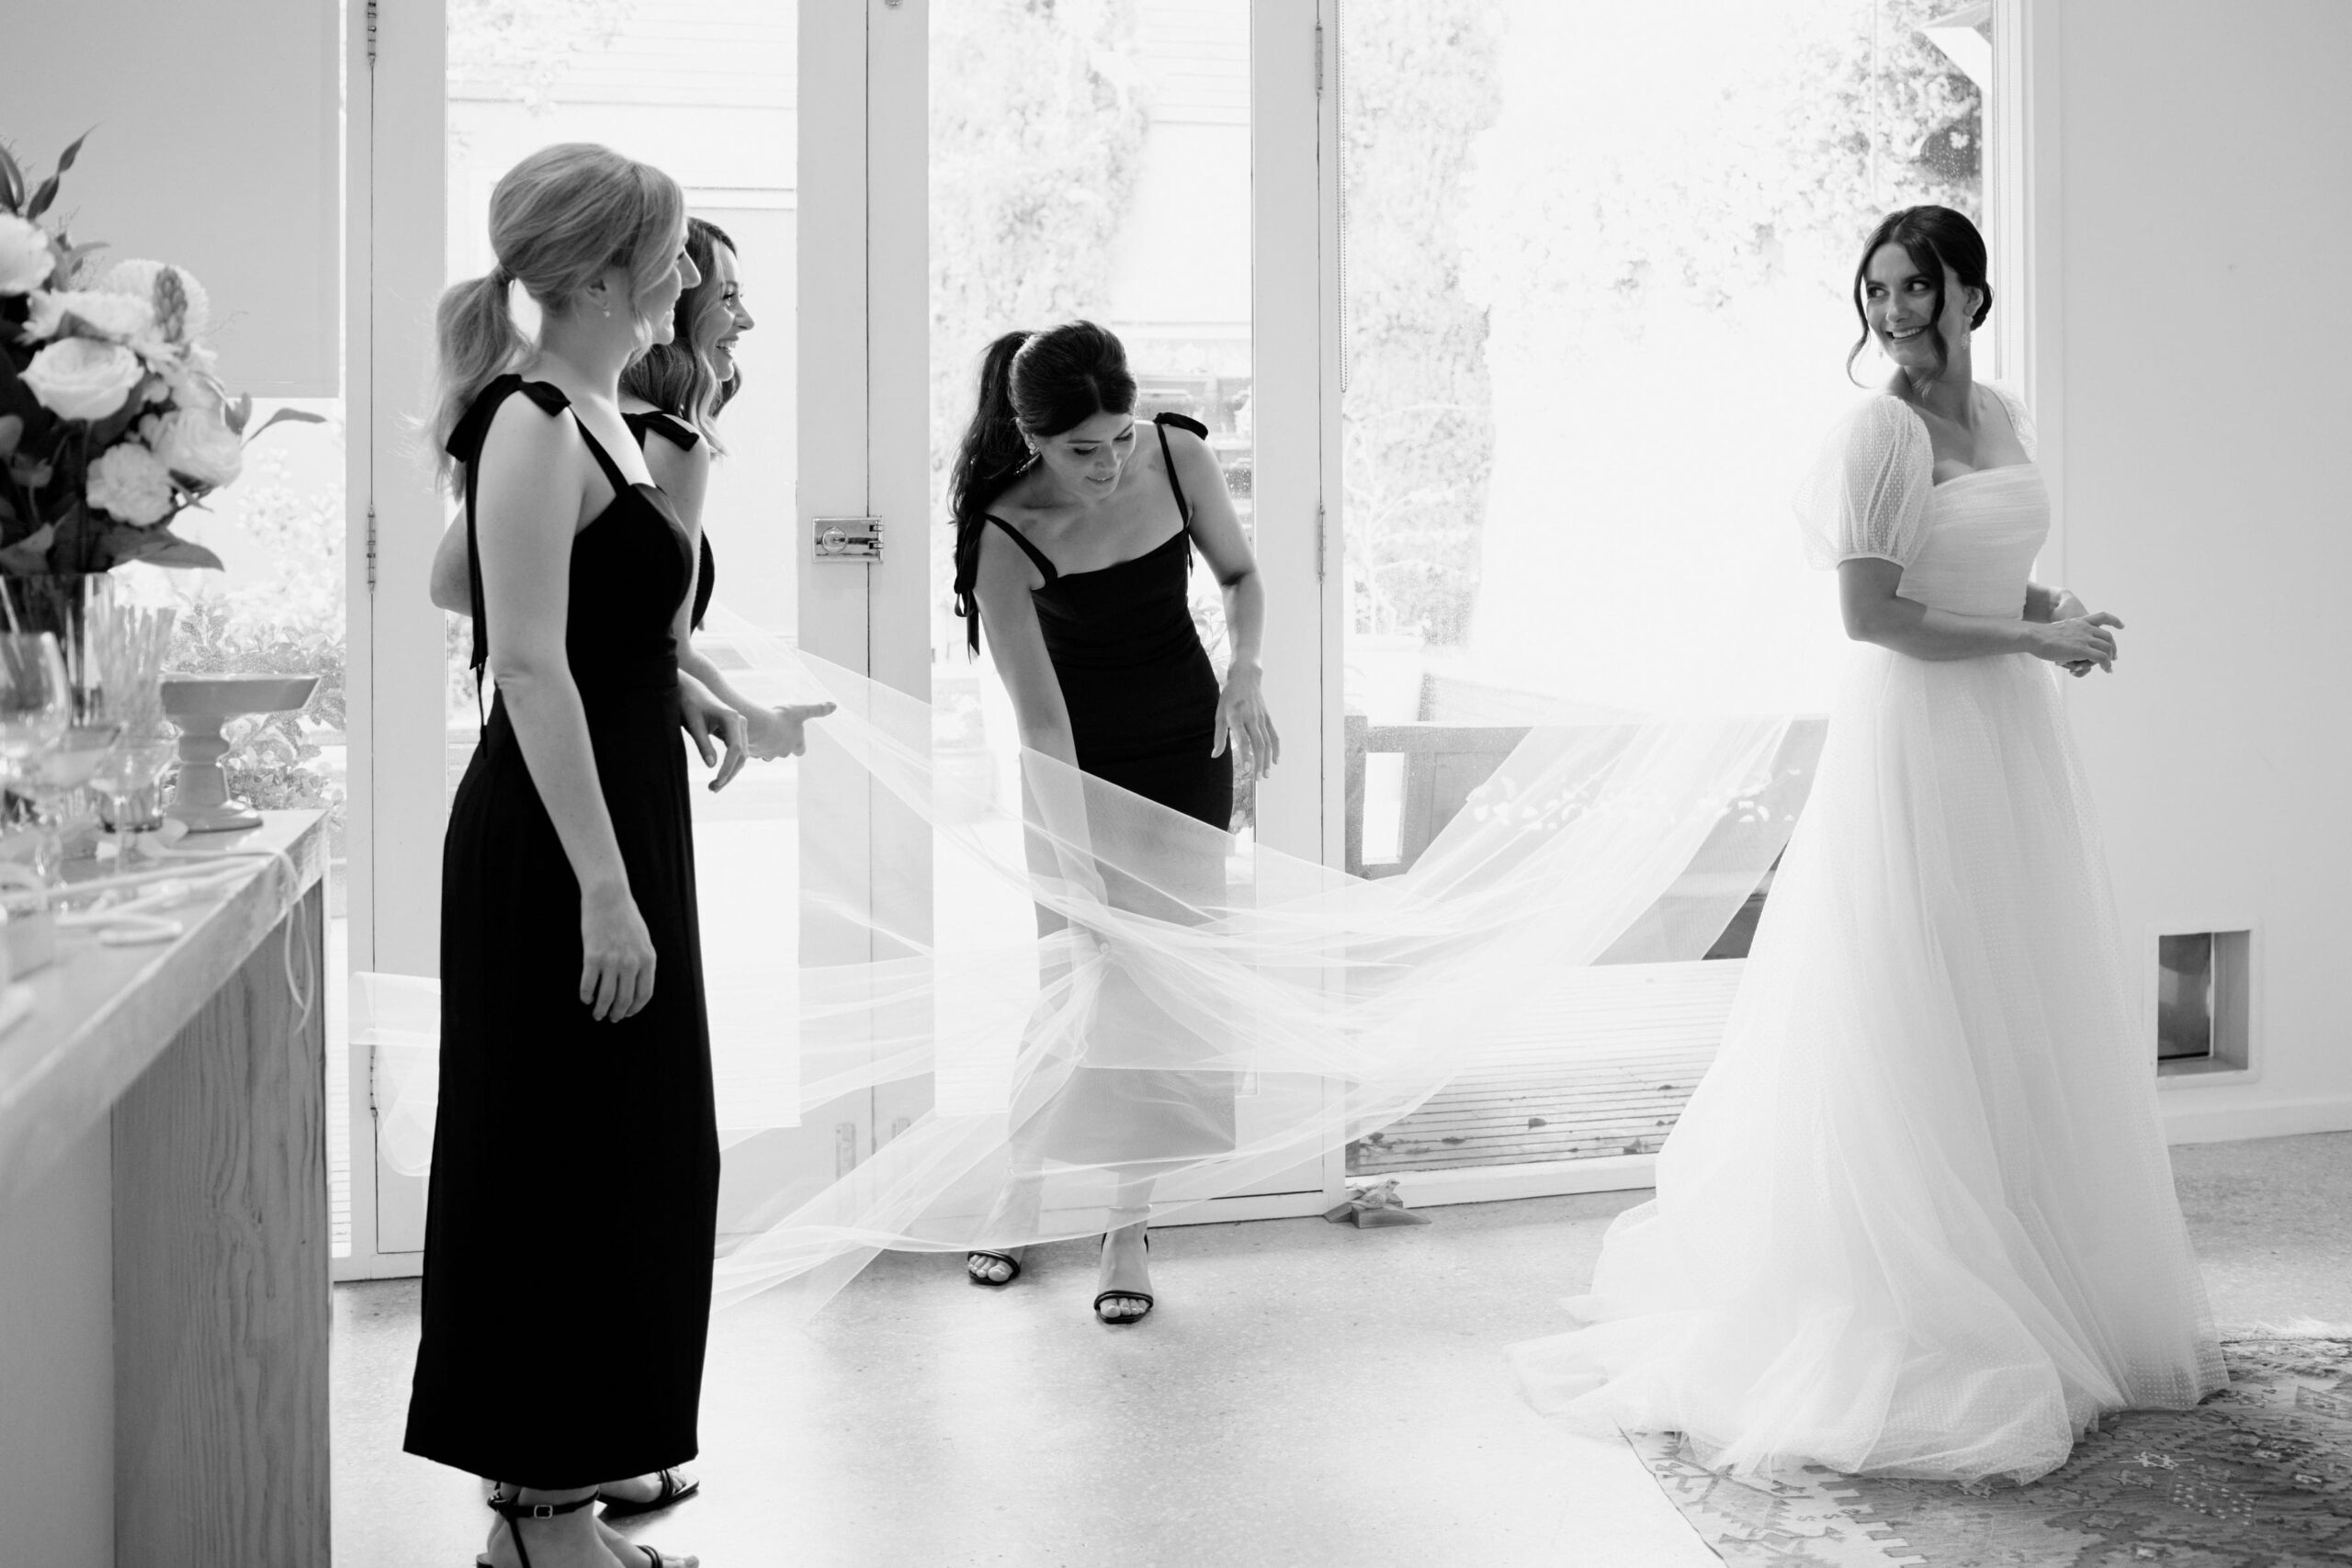 Maddy and bridesmaids getting ready, fluffing out Maddy's veil